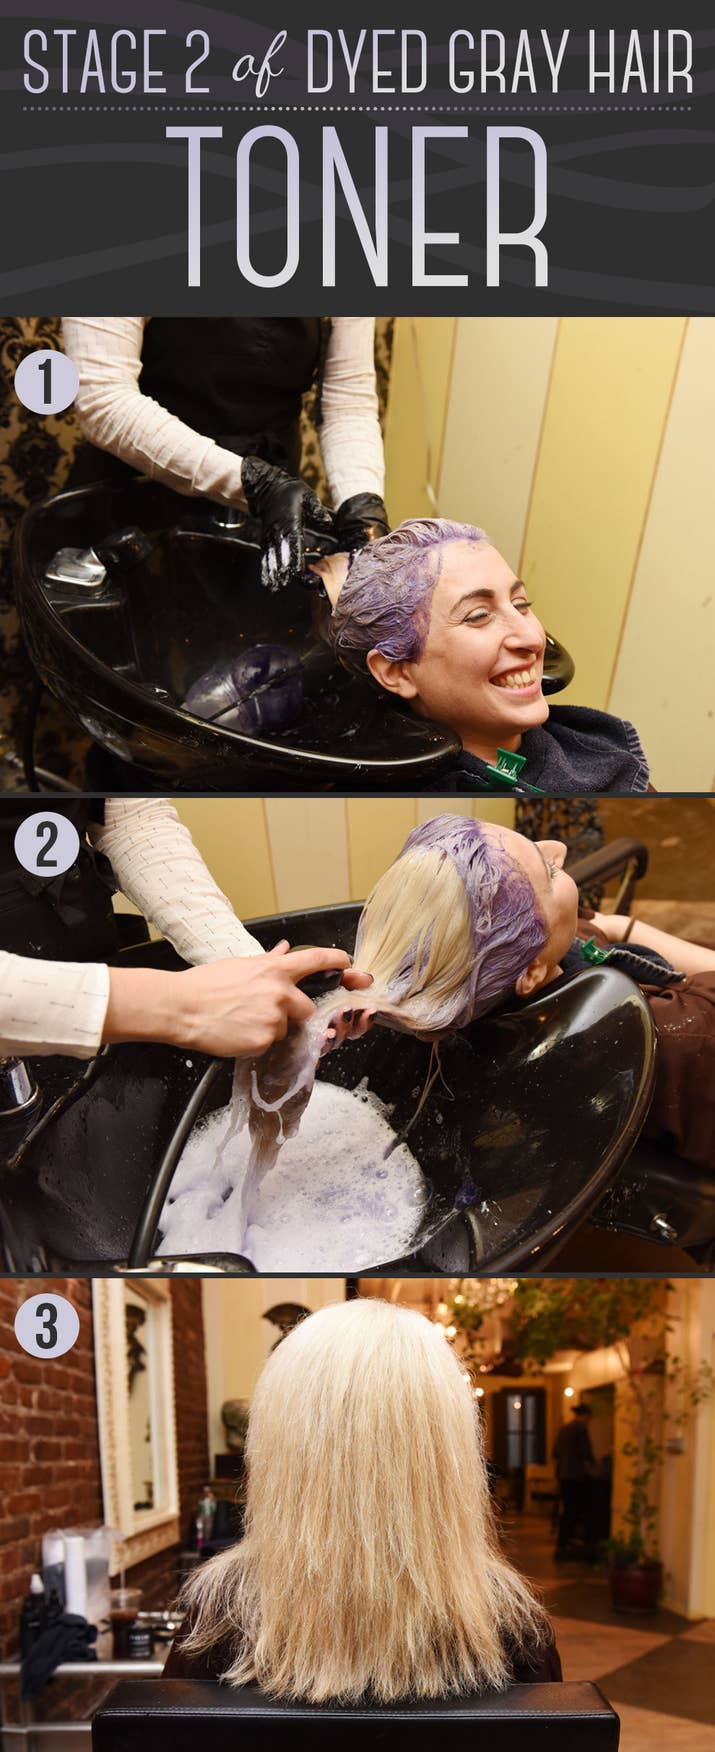 Time: 24 minutesCost: $40After two rounds of bleach, Arteca applied a purple toner to Julie's hair and let it sit for about 20 minutes before washing it out.